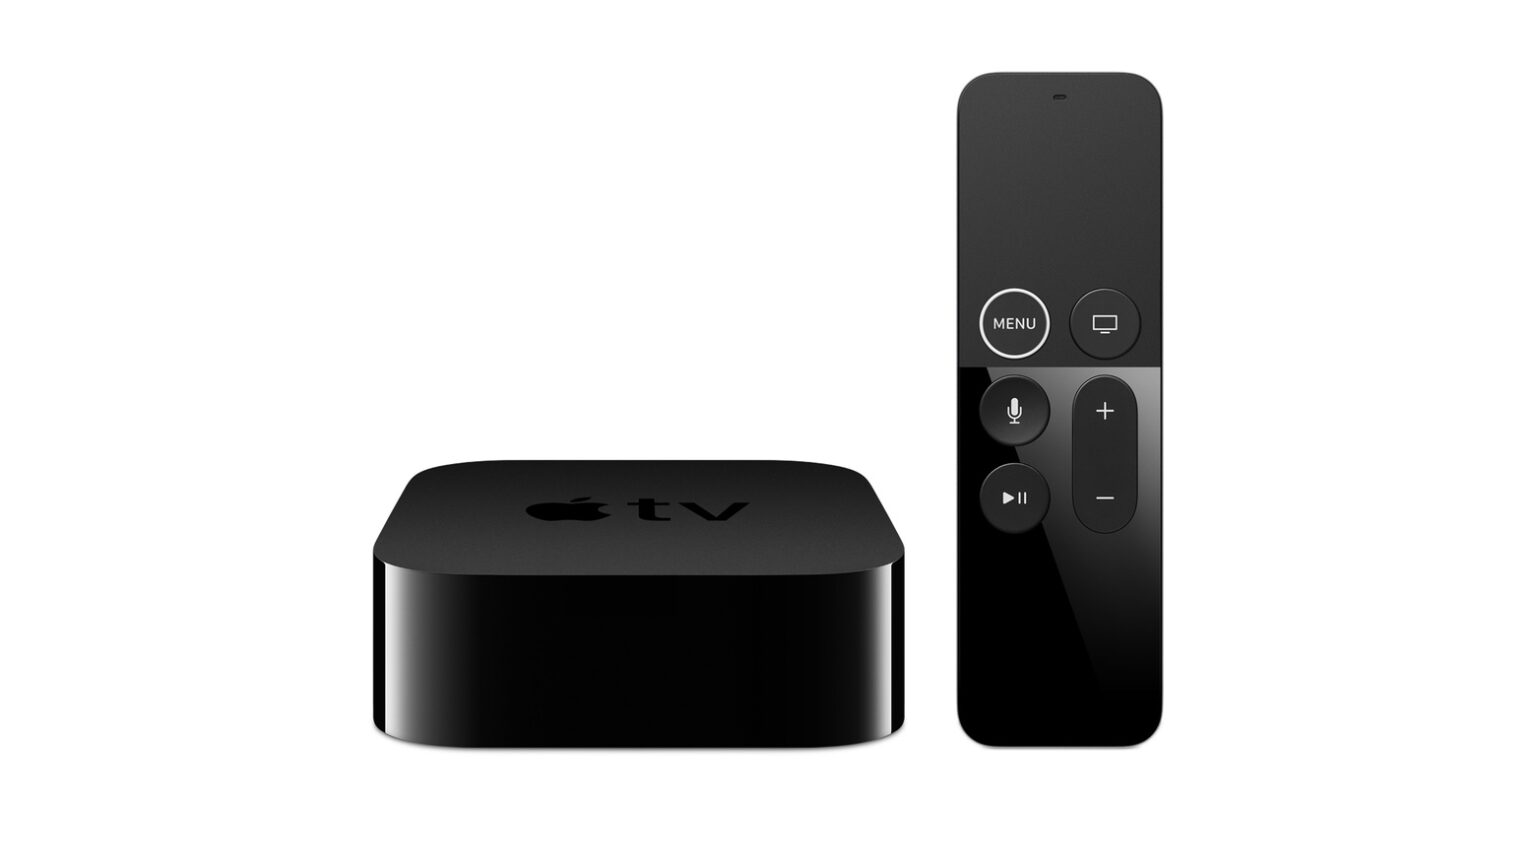 Expect a significant Apple TV hardware update in 2021.